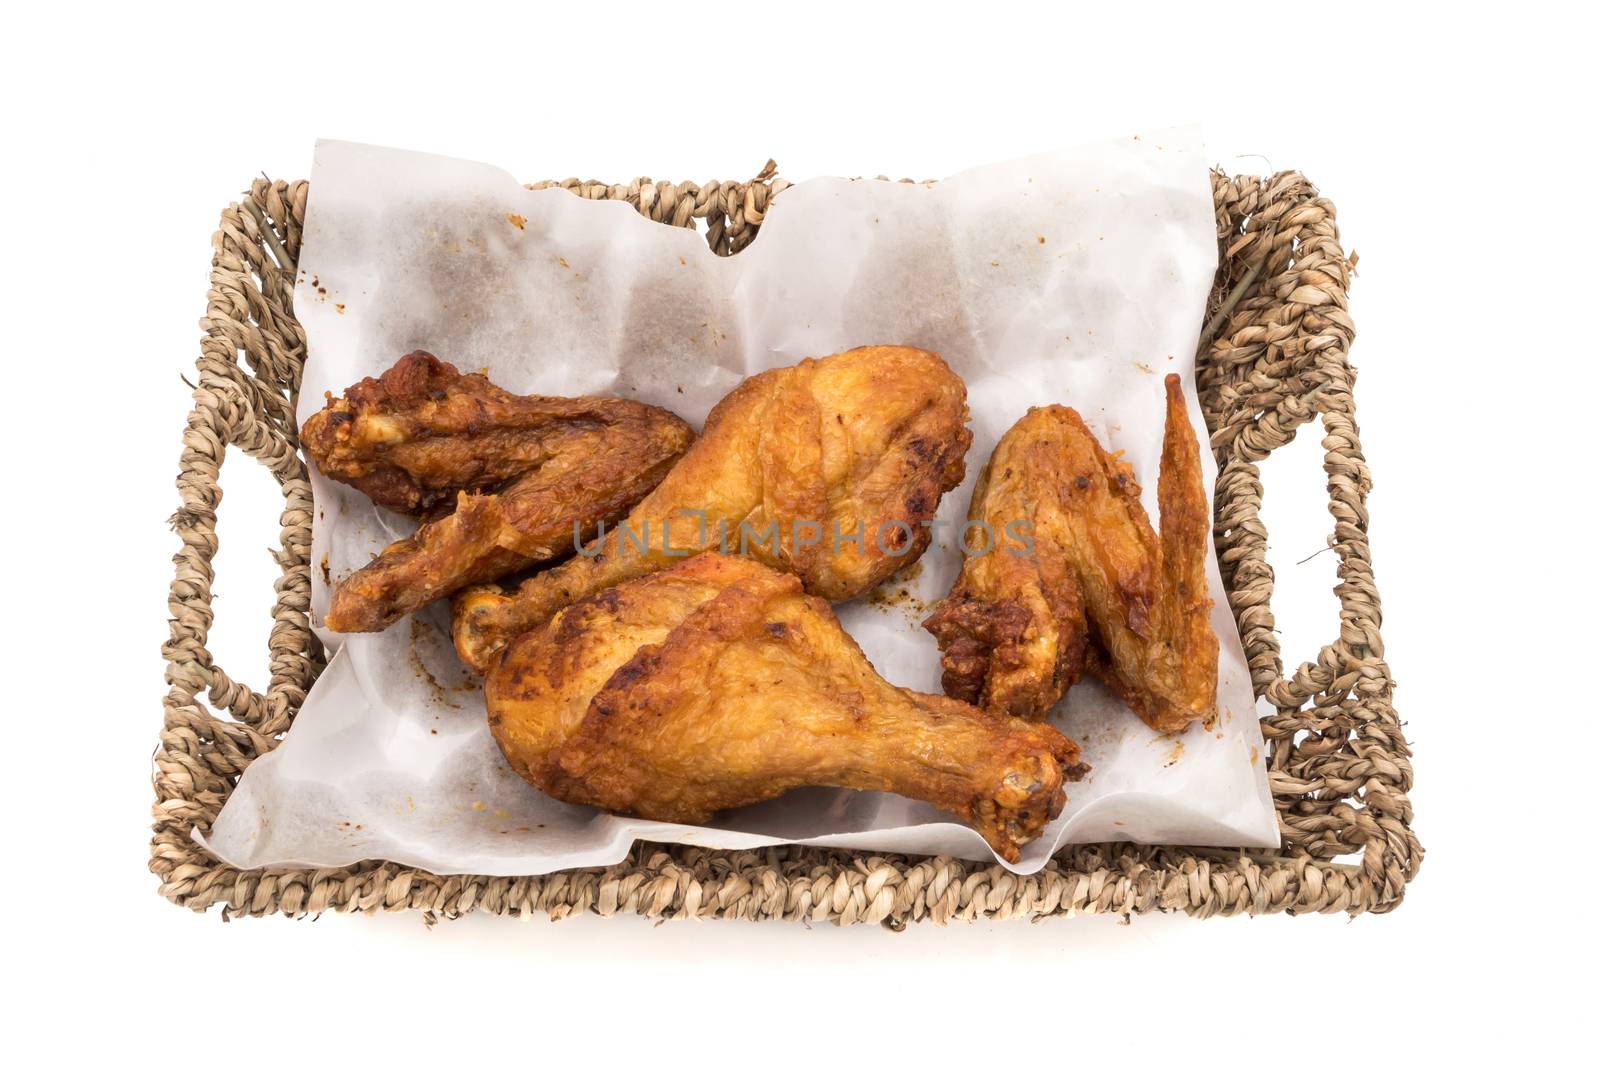 Fried chicken legs and wings in basket on a white background. by ronnarong